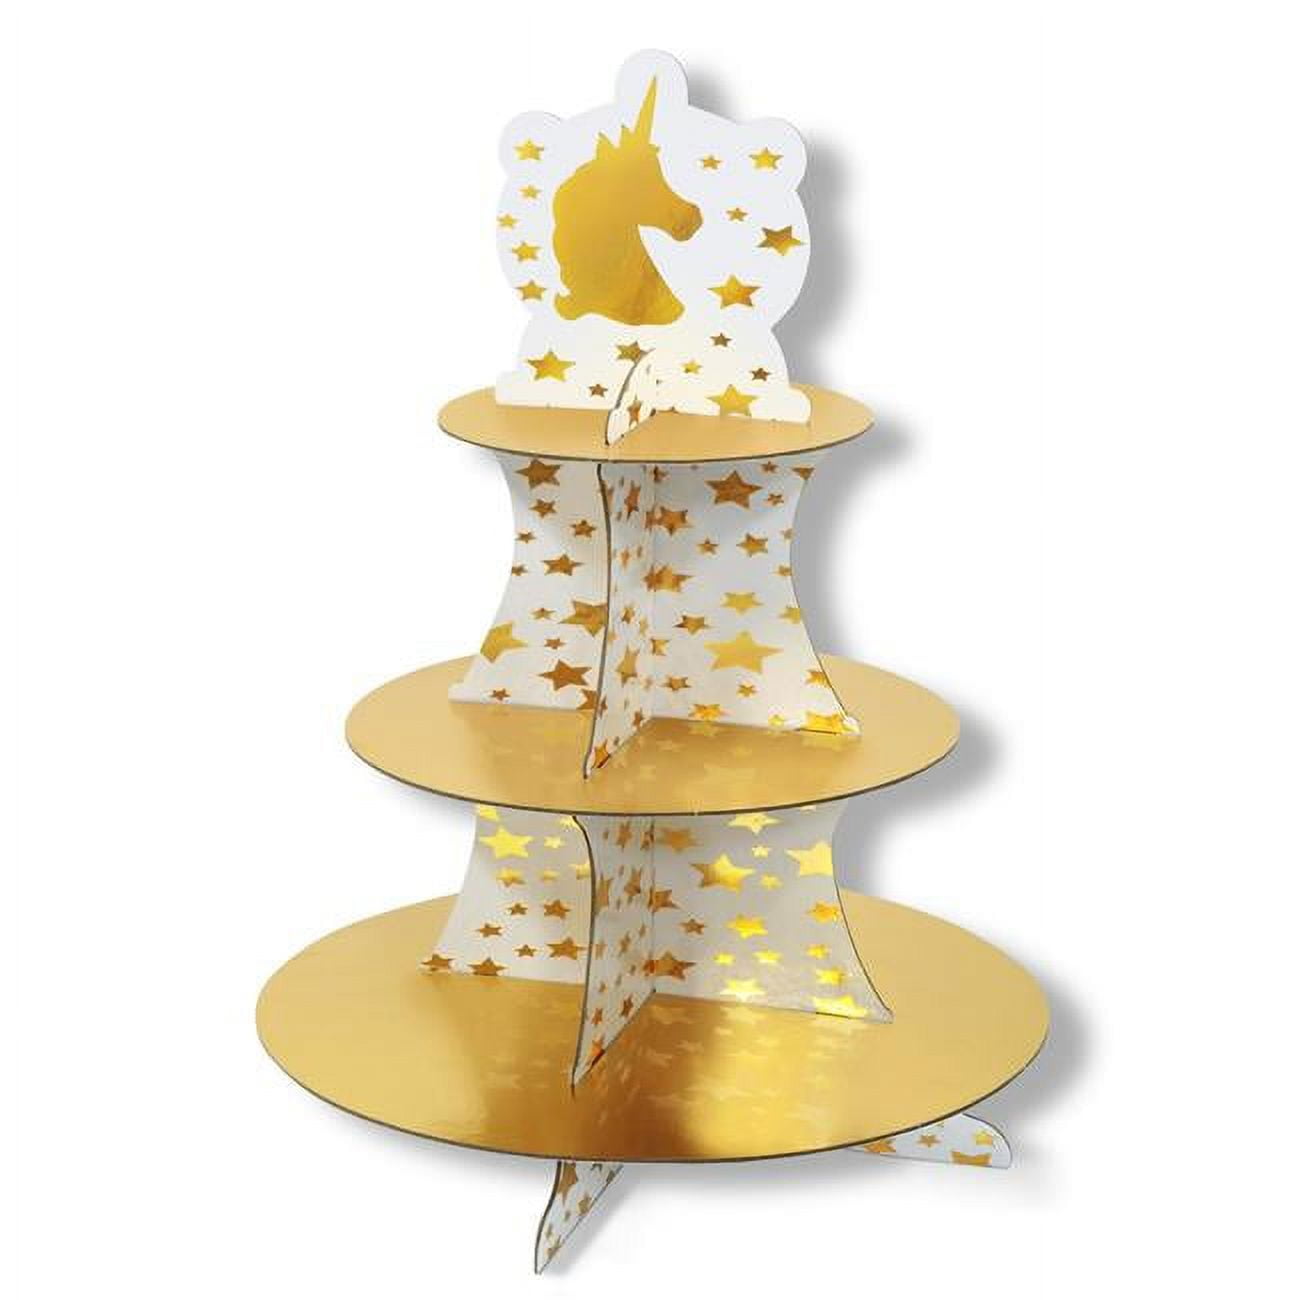 Beistle 53369 16 In. Unicorn Cupcake Stand - Pack Of 12